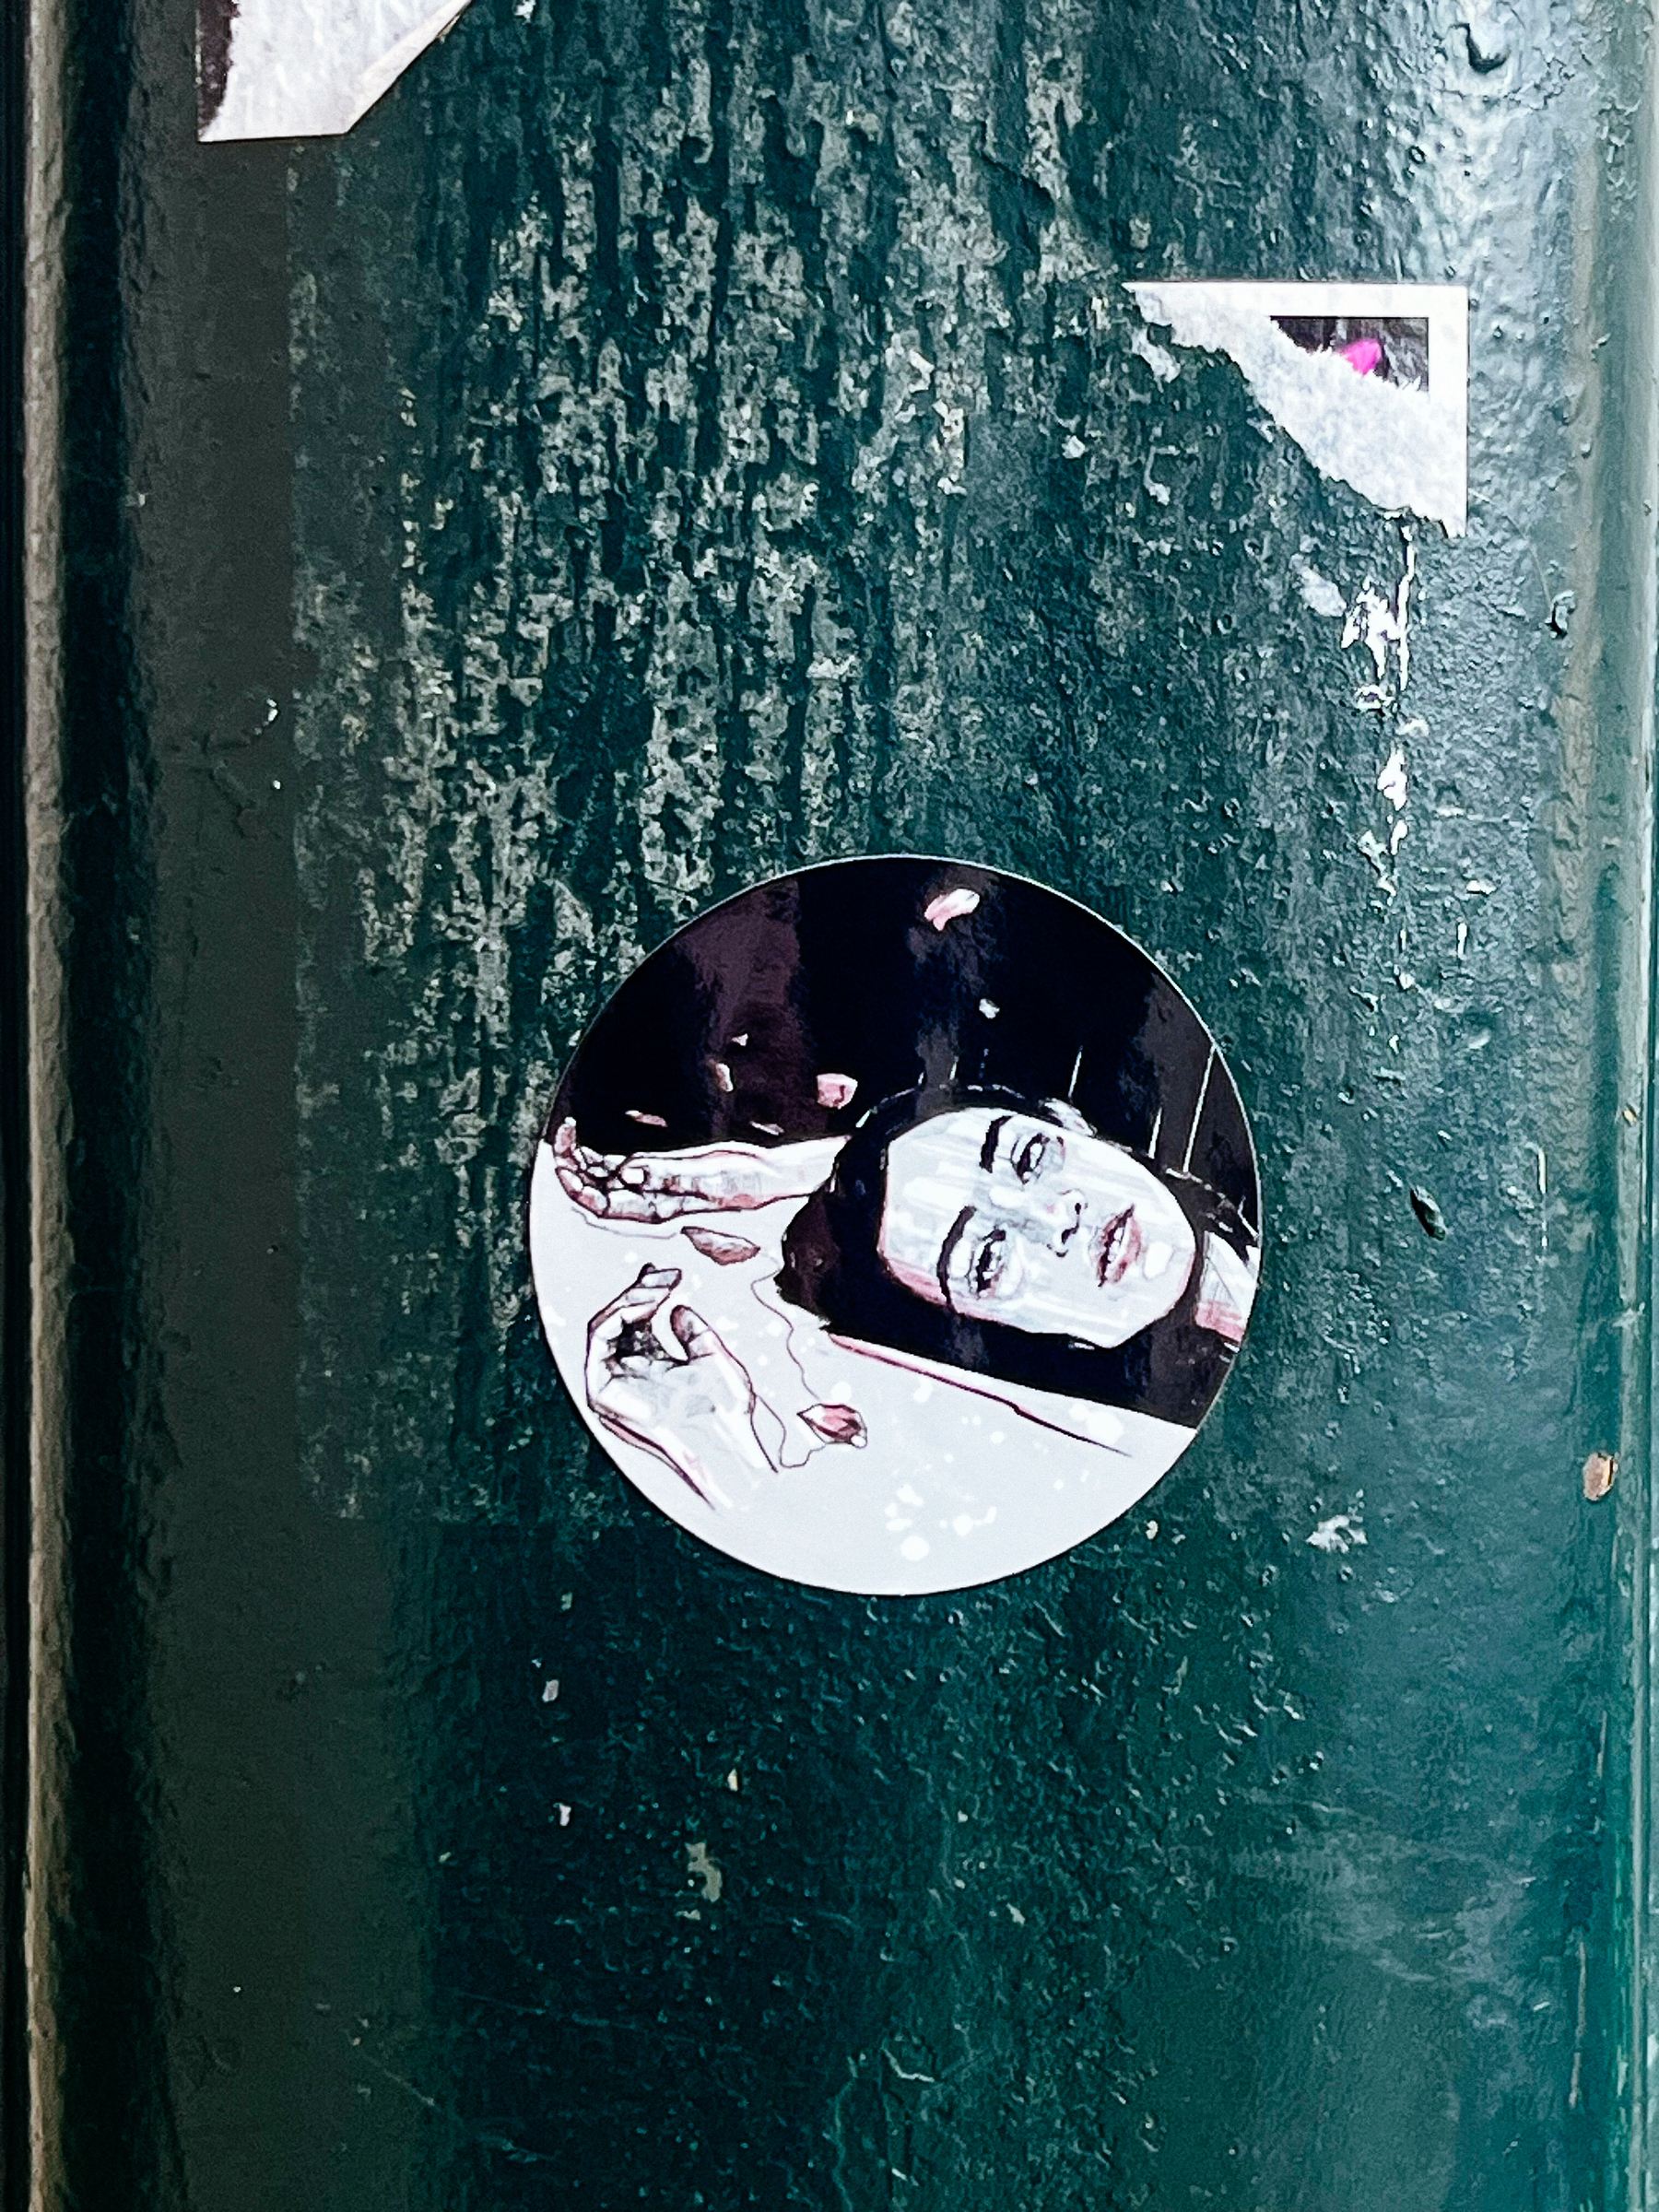 A sticker depicting a monochromatic illustration of a person&rsquo;s face and hand is adhered to a textured green surface, surrounded by remnants of other stickers.